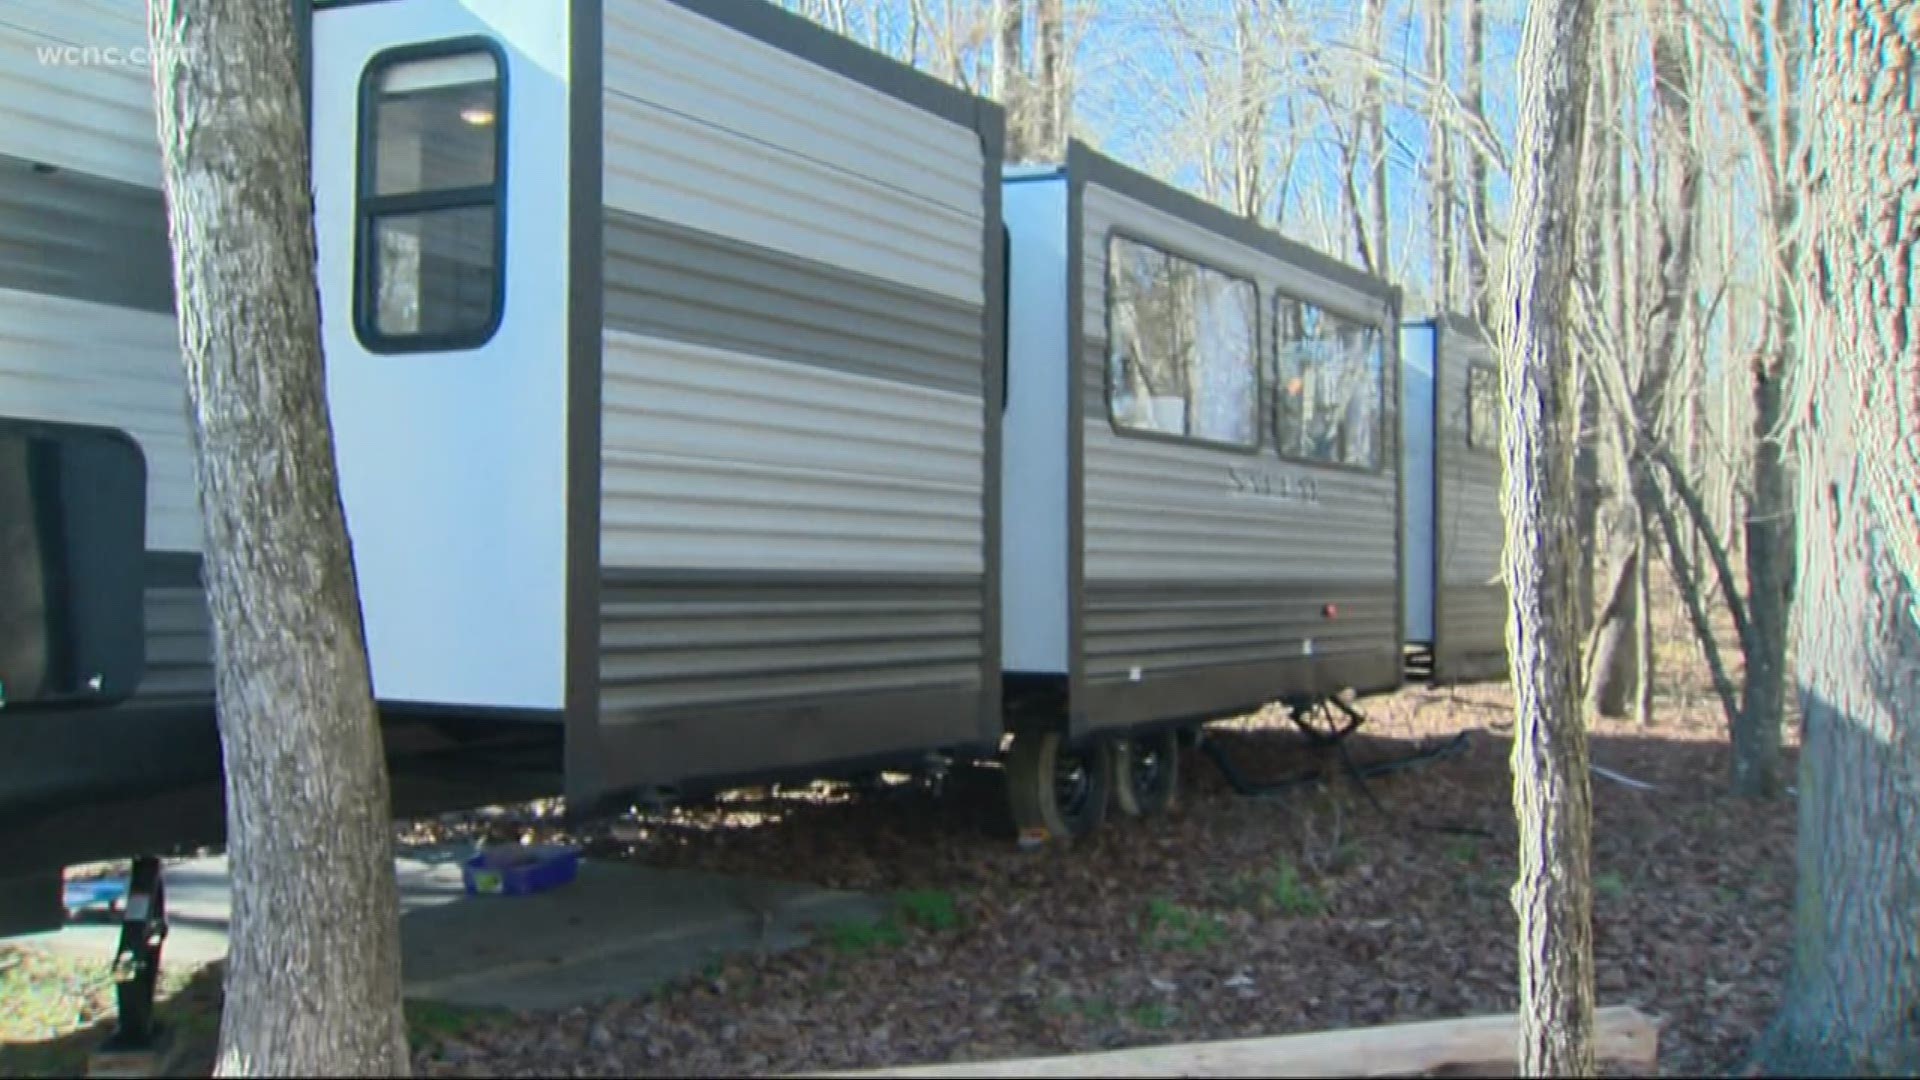 The family of seven and their four pets got rid of their six bedroom home, bought and renovated an RV and are planning to take a cross-country road trip.